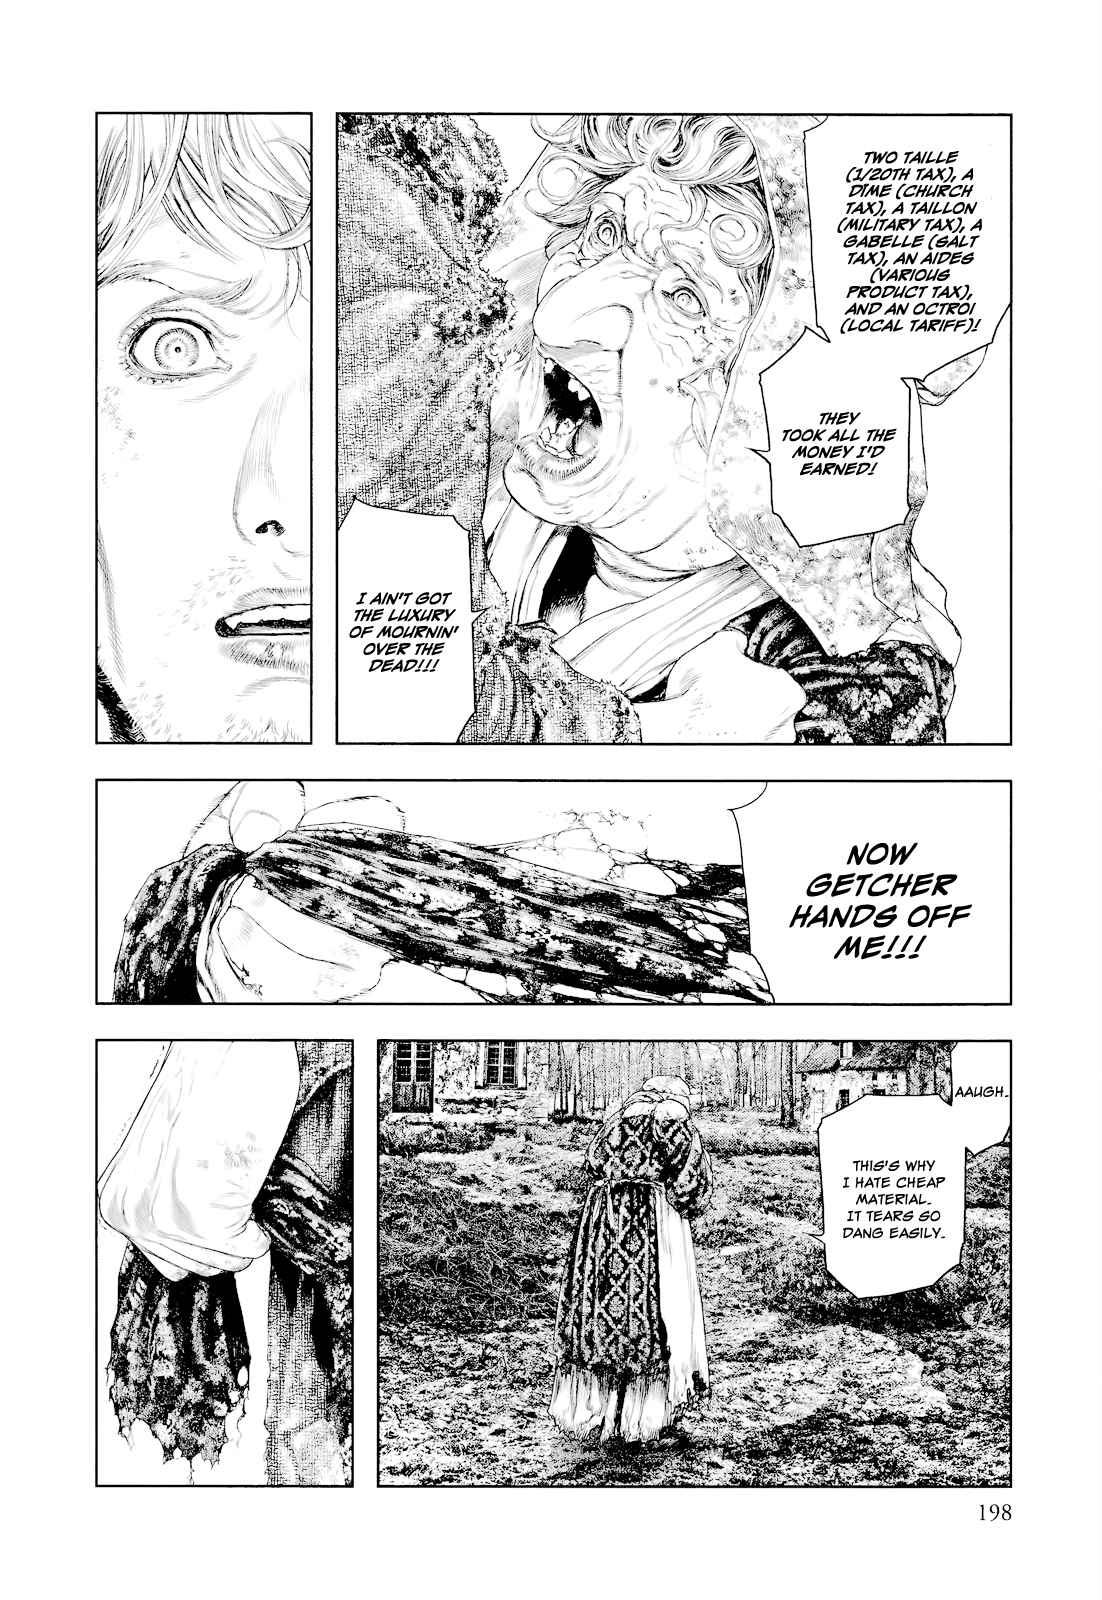 Innocent Vol. 2 Ch. 19 Spiral of Life and Death